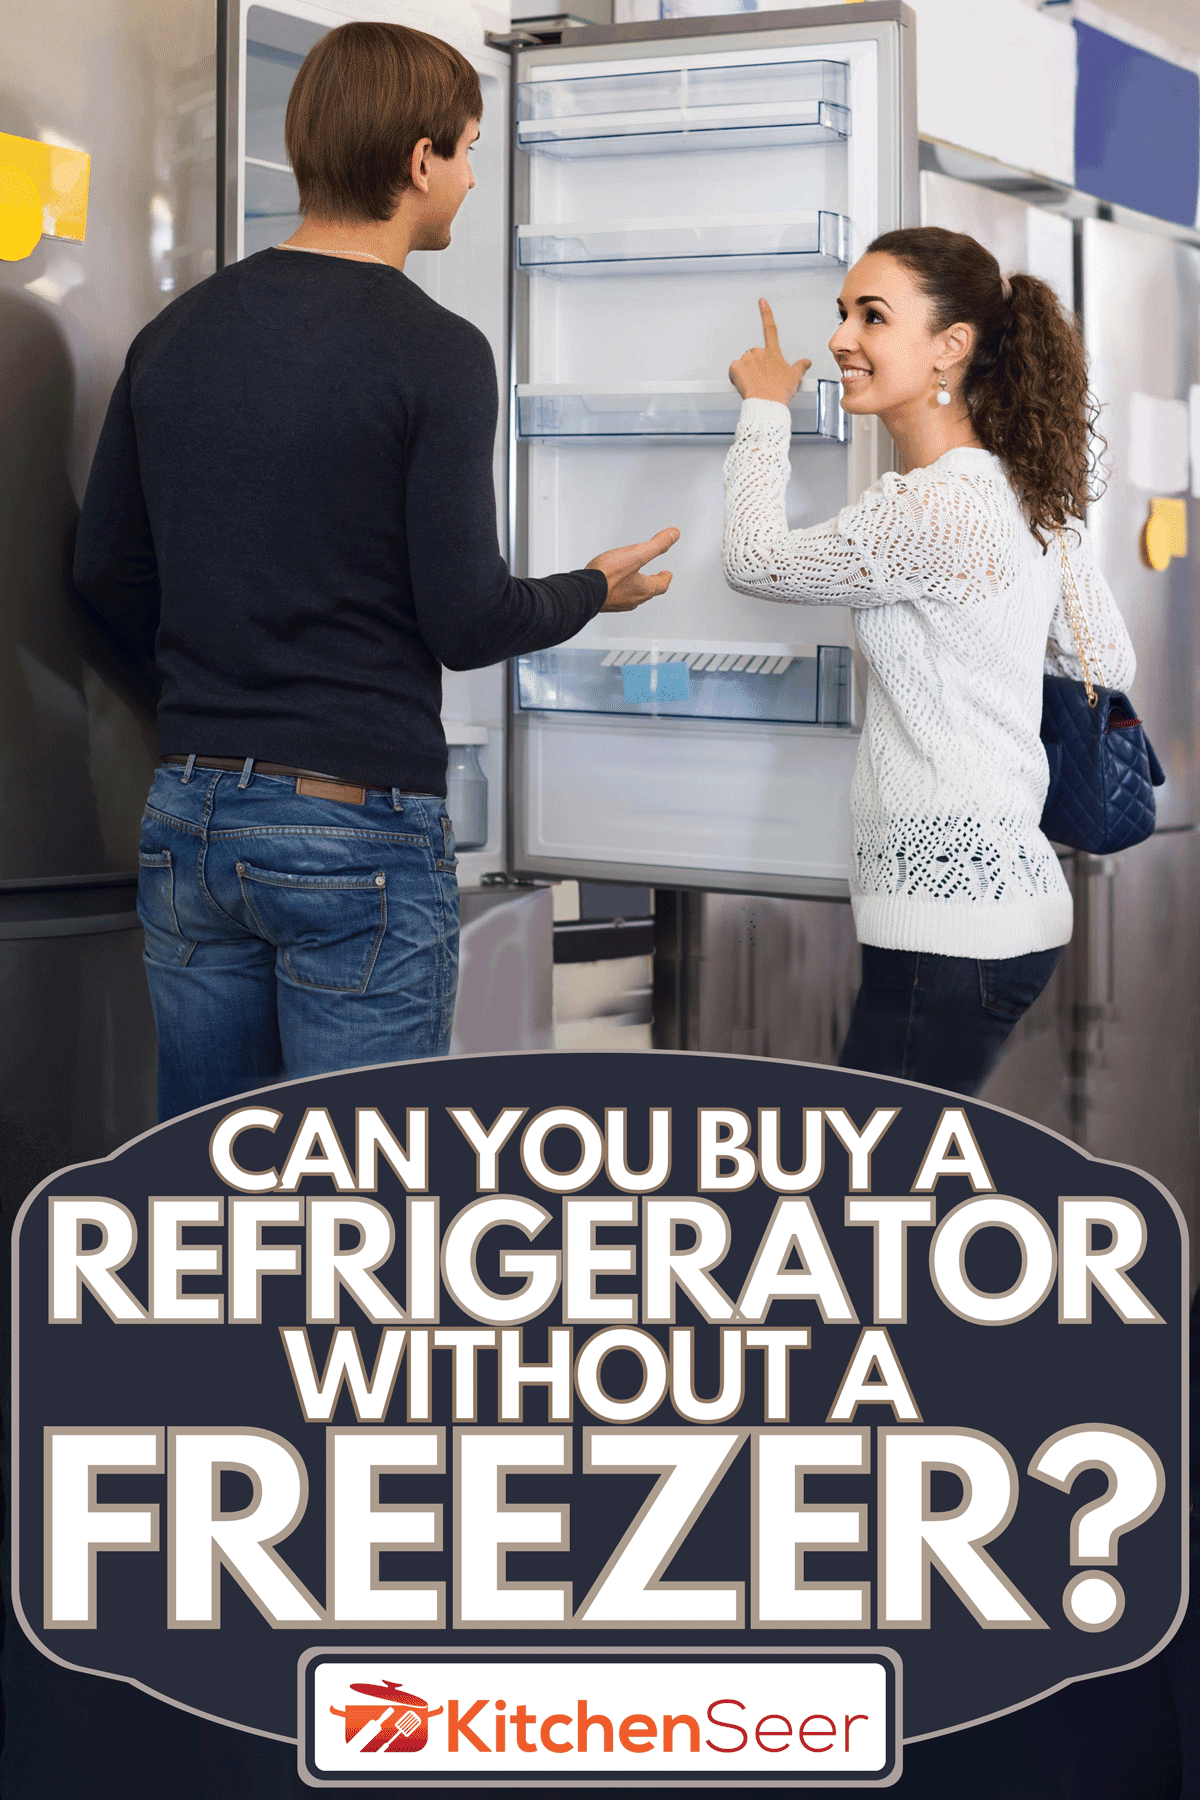 Family couple choosing new refrigerator in hypermarket, Can You Buy A Refrigerator Without A Freezer?